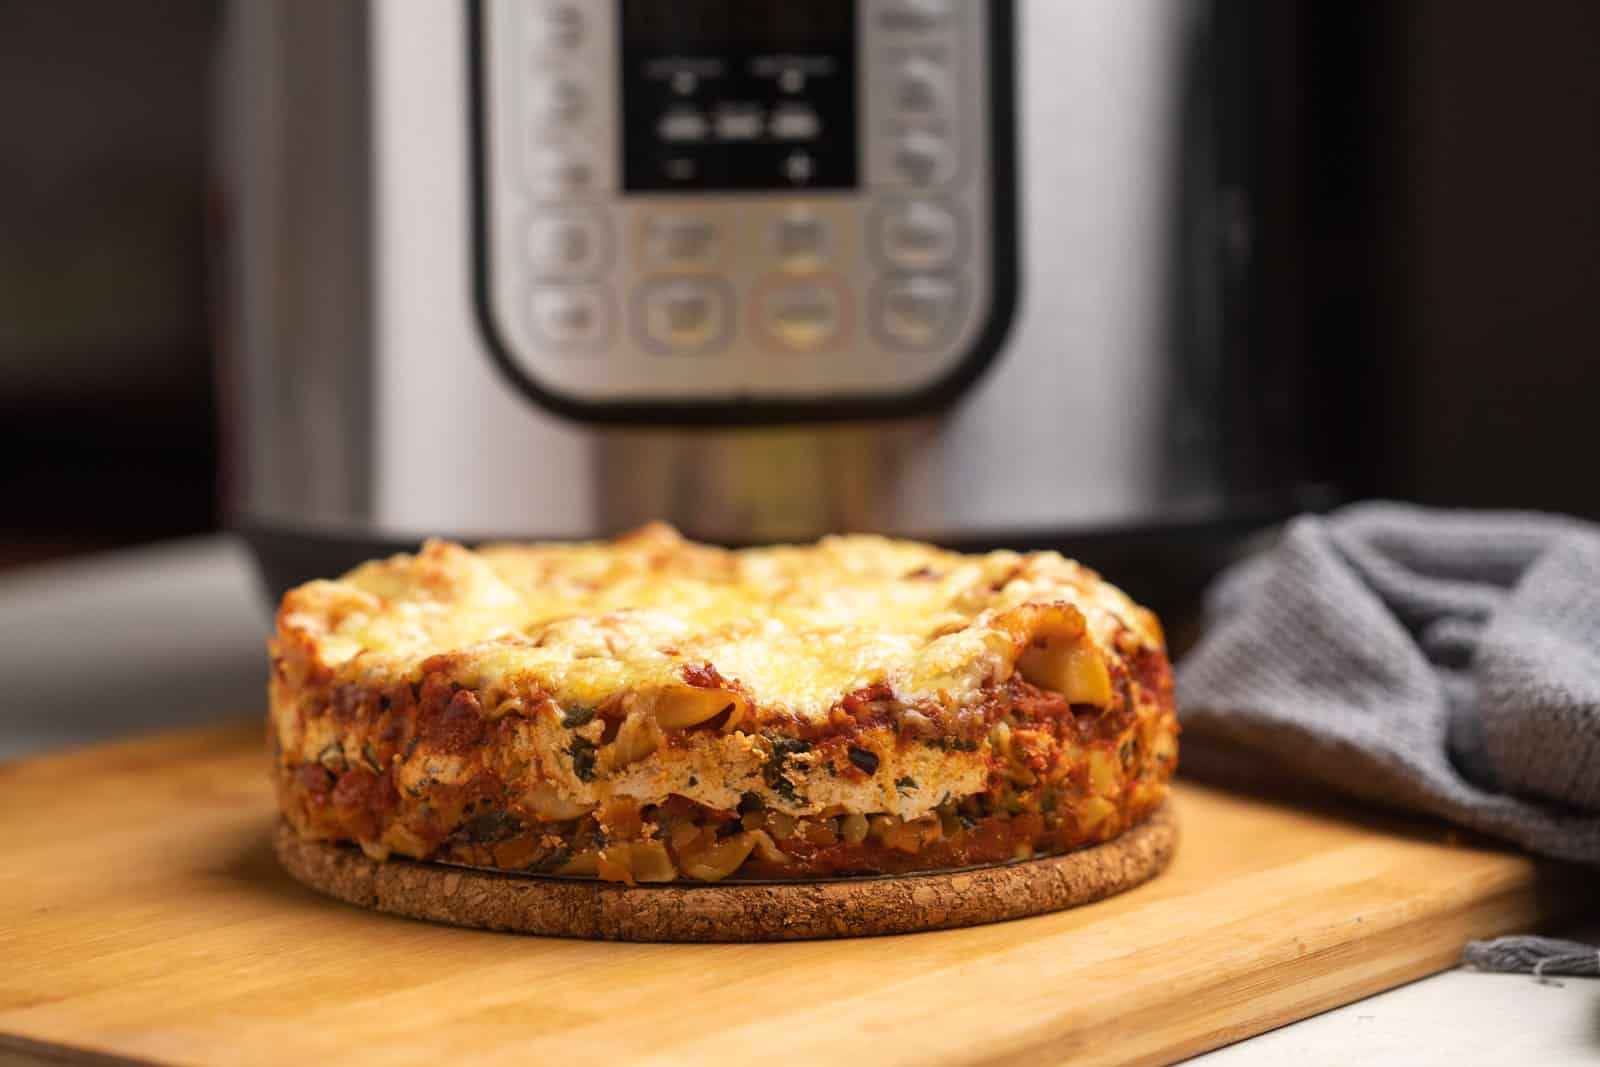 Instant Pot lasagna served with the Instant Pot in the background